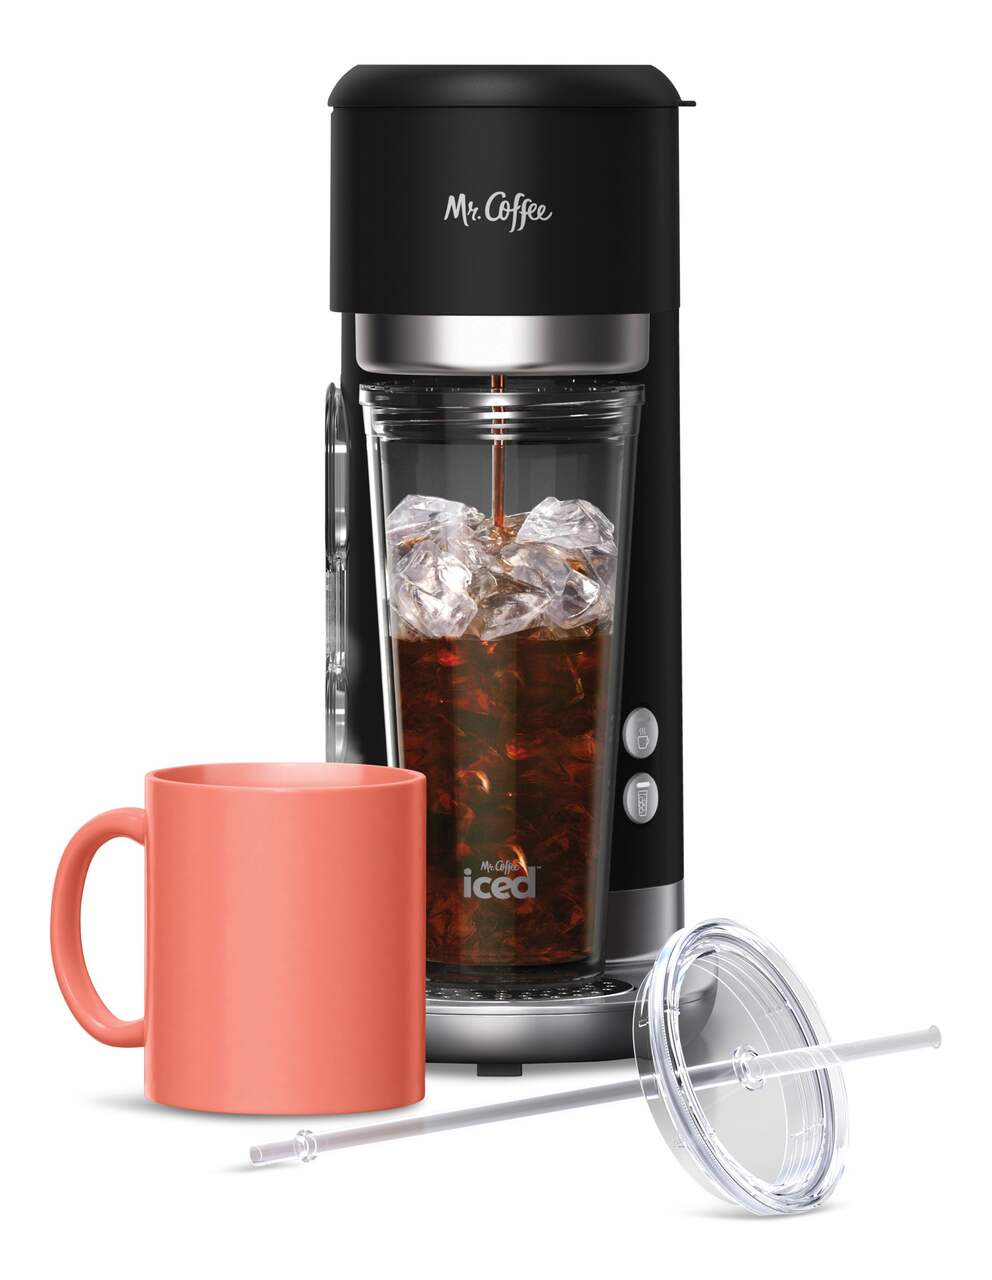  Mr. Coffee Iced Coffee Maker, Single Serve Hot and Cold Coffee  Maker with 22 ounce Reusable Tumbler, Filter and Wholesalehome Cloth : Home  & Kitchen